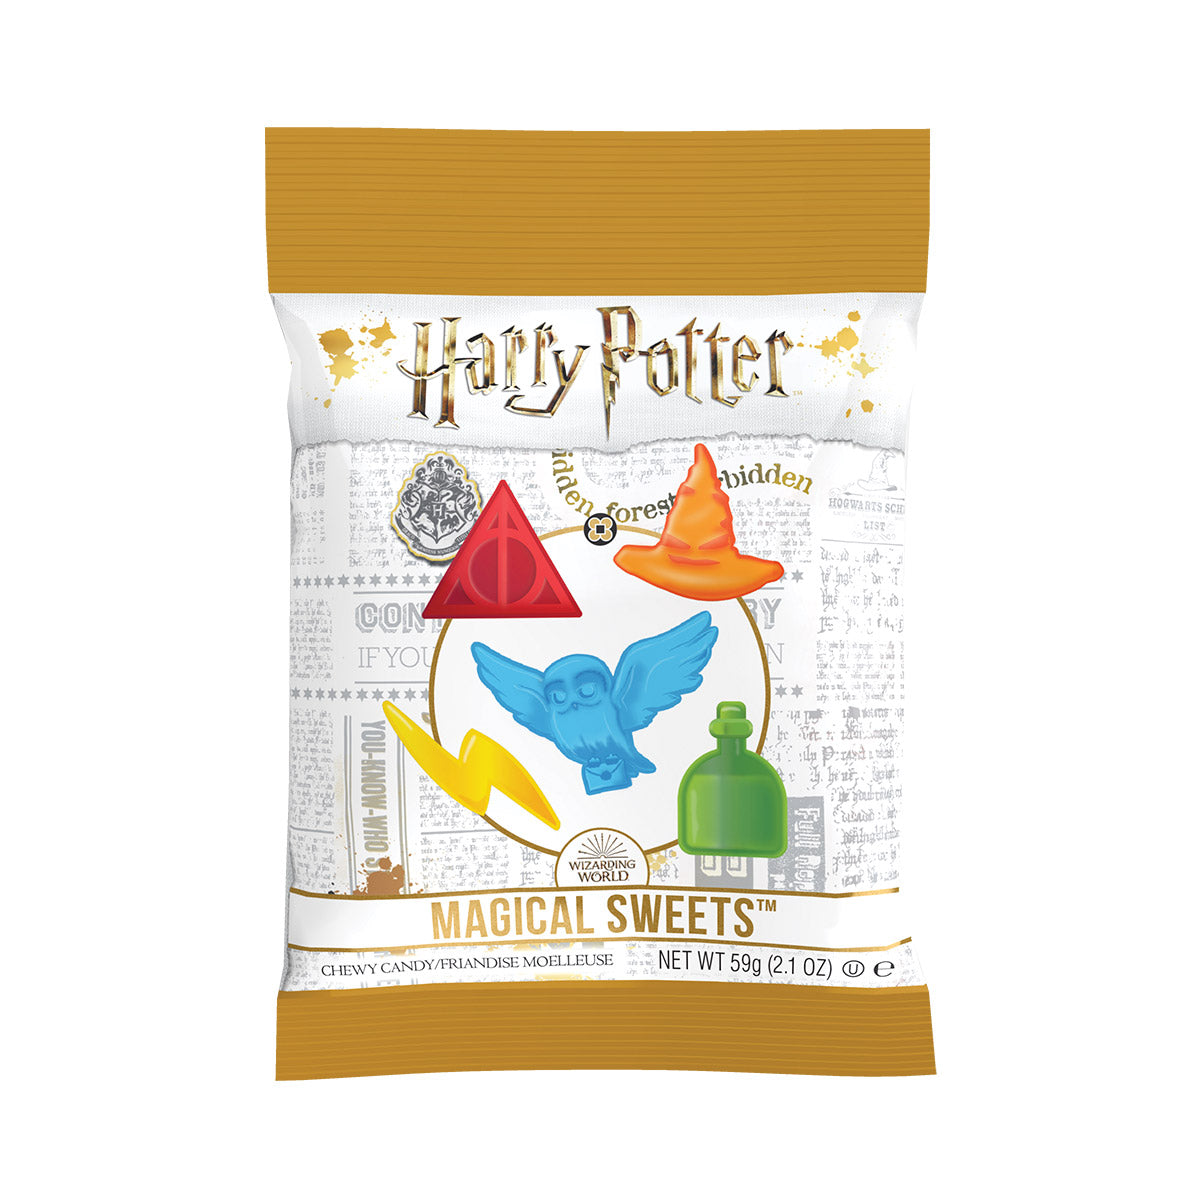 Jelly Belly - Share the magic with the HARRY POTTER™ fans in your life with  our Harry Potter-inspired chocolates and confections!